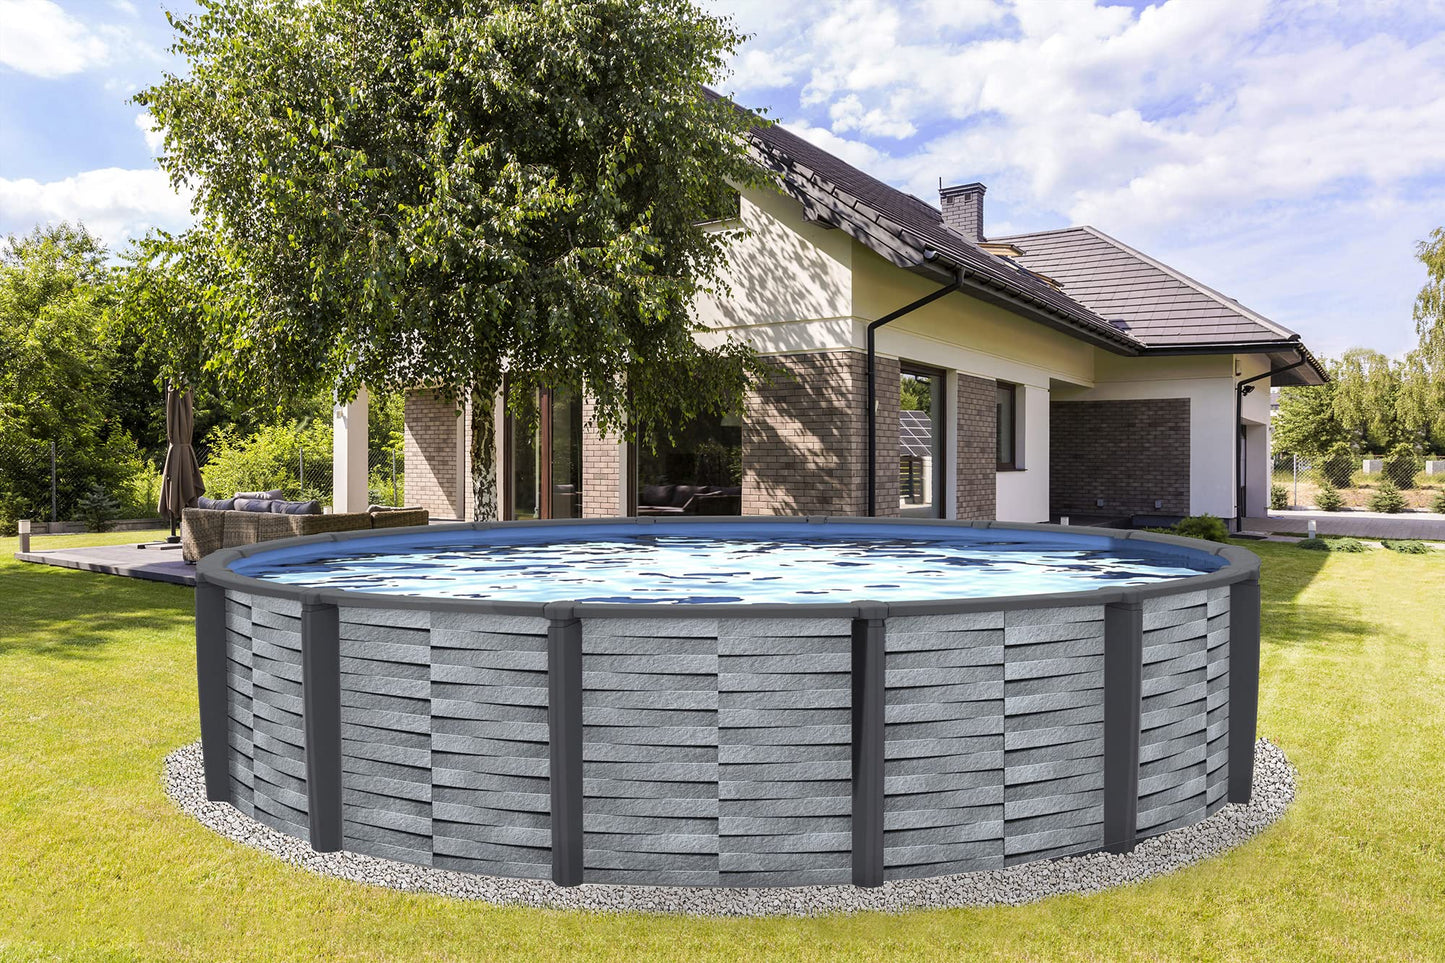 Blue Wave NB19833 Affinity 18-ft Round 52-in Deep 7-in Top Rail Resin Package Above Ground Swimming Pool, x, Gray